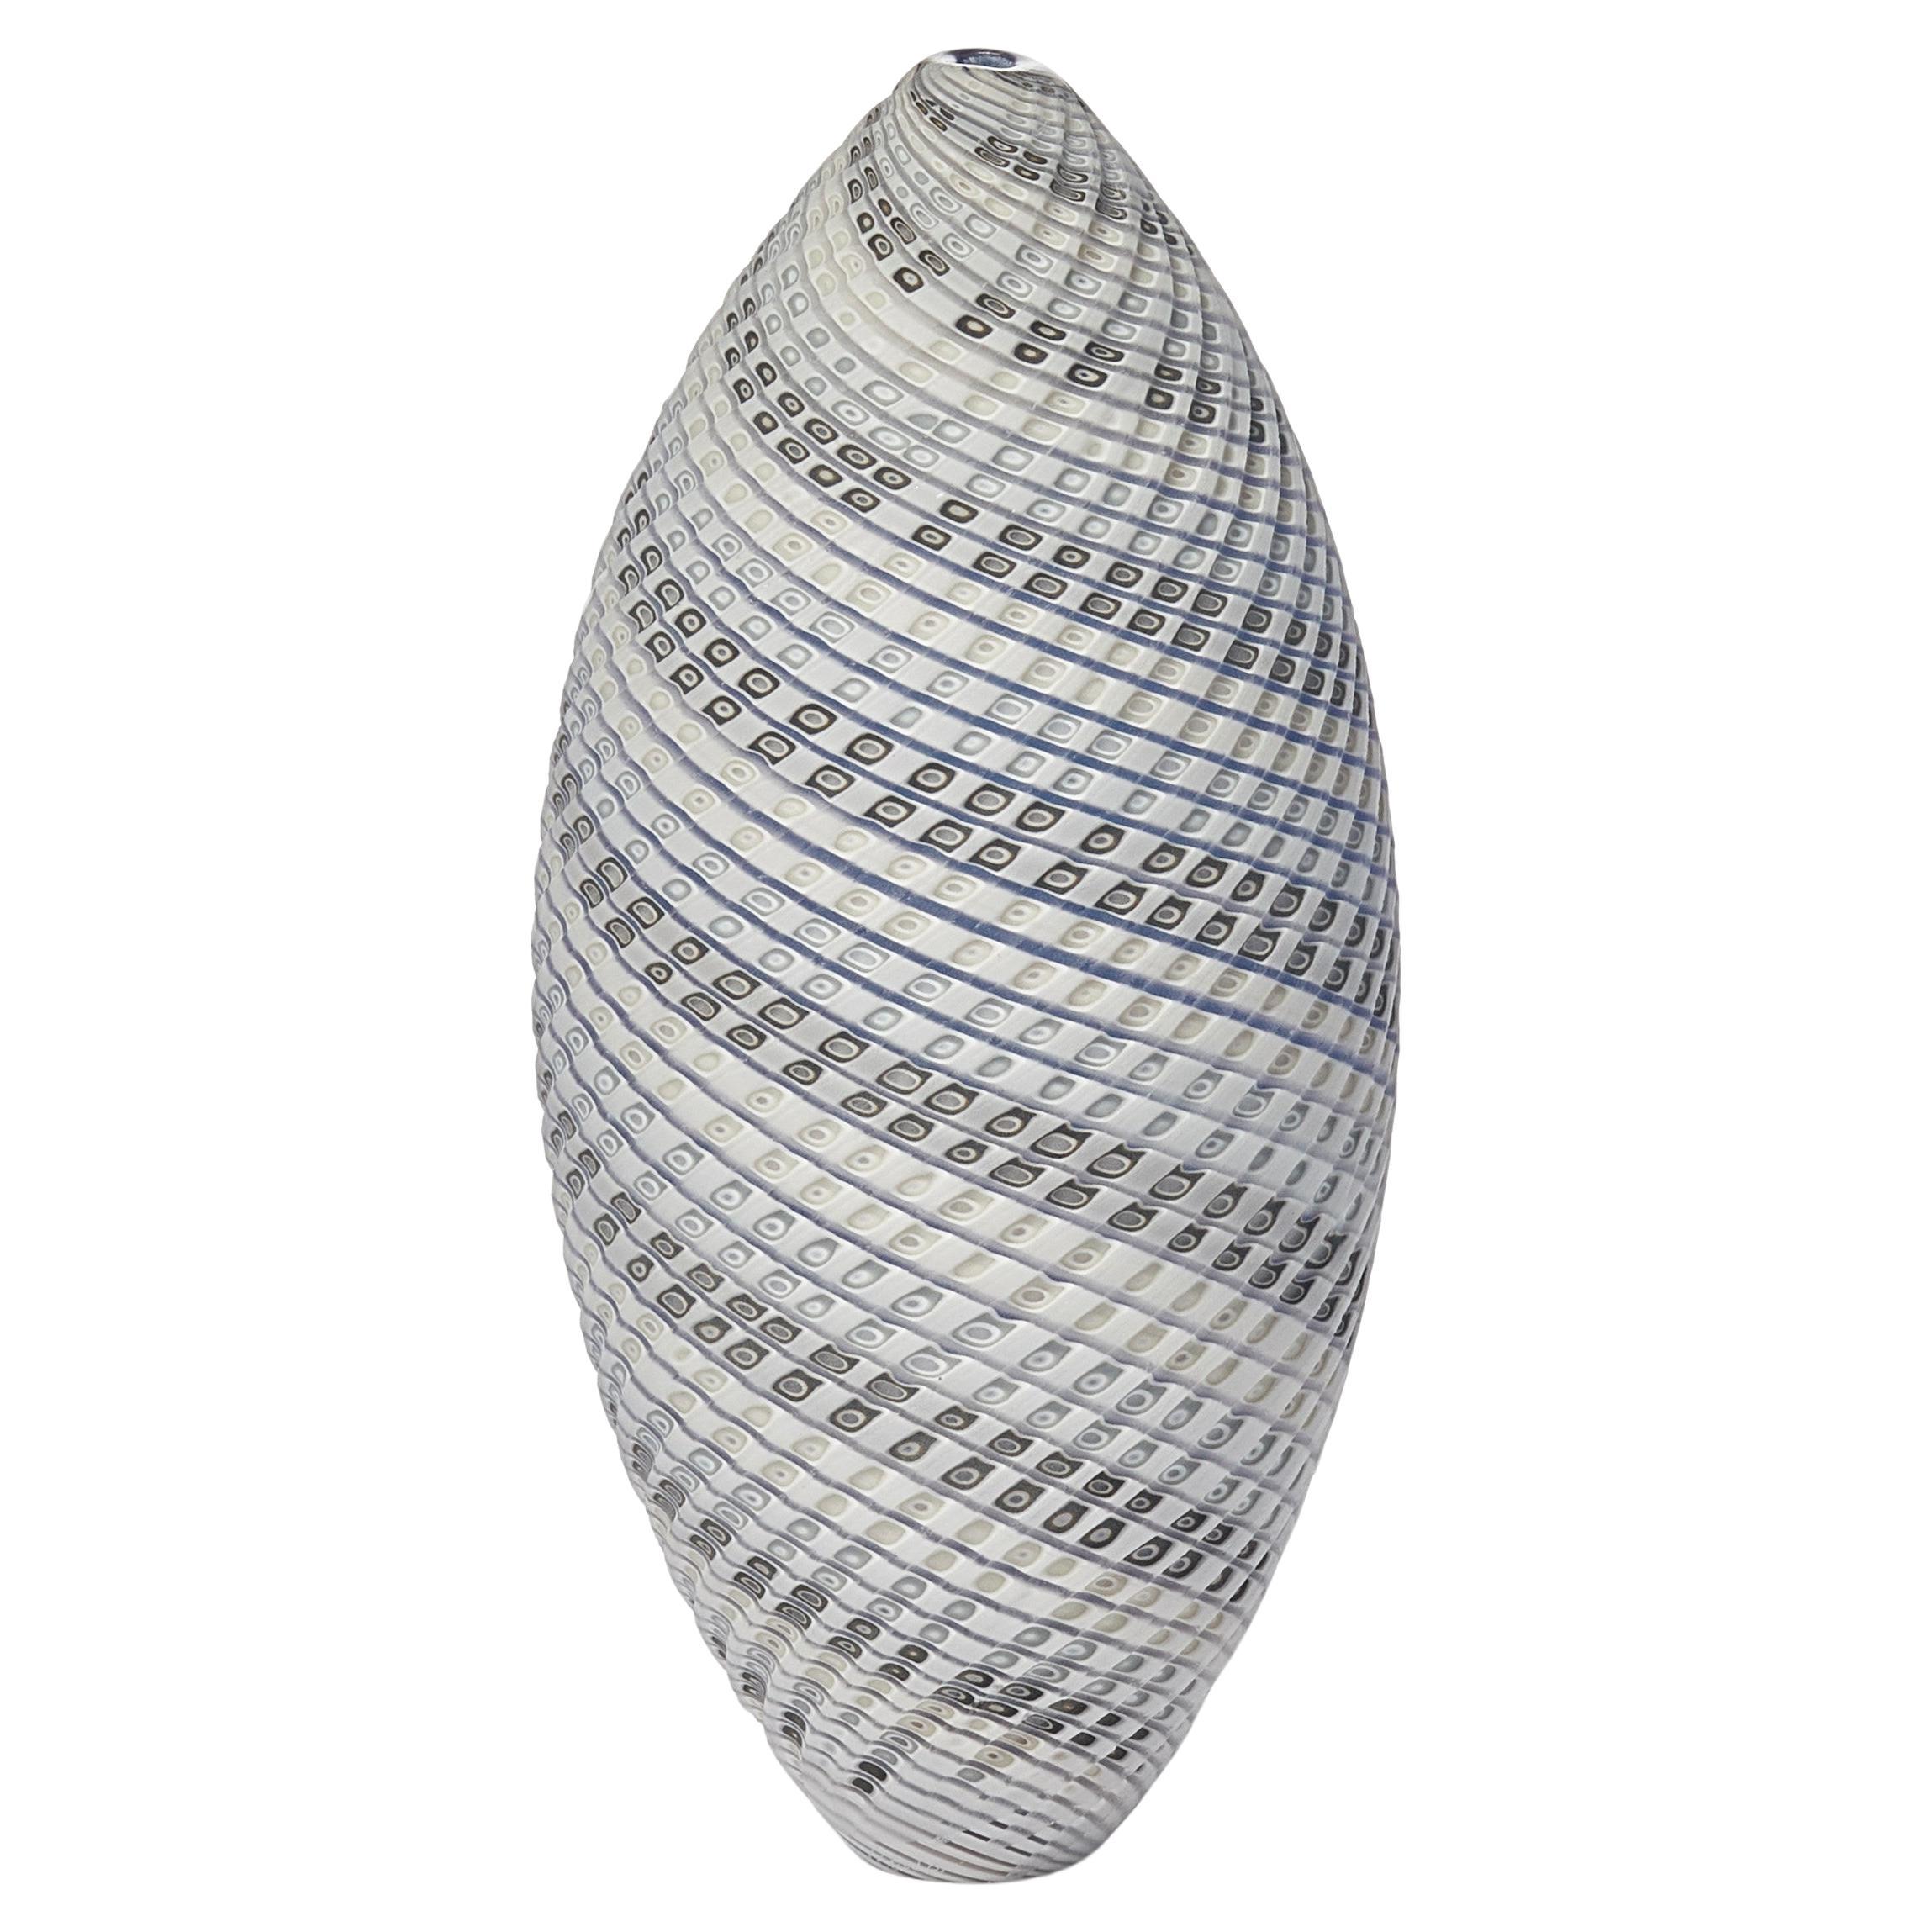 Woven Three Tone Blue Ovoid (sm), textured handblown glass vessel by Layne Rowe For Sale